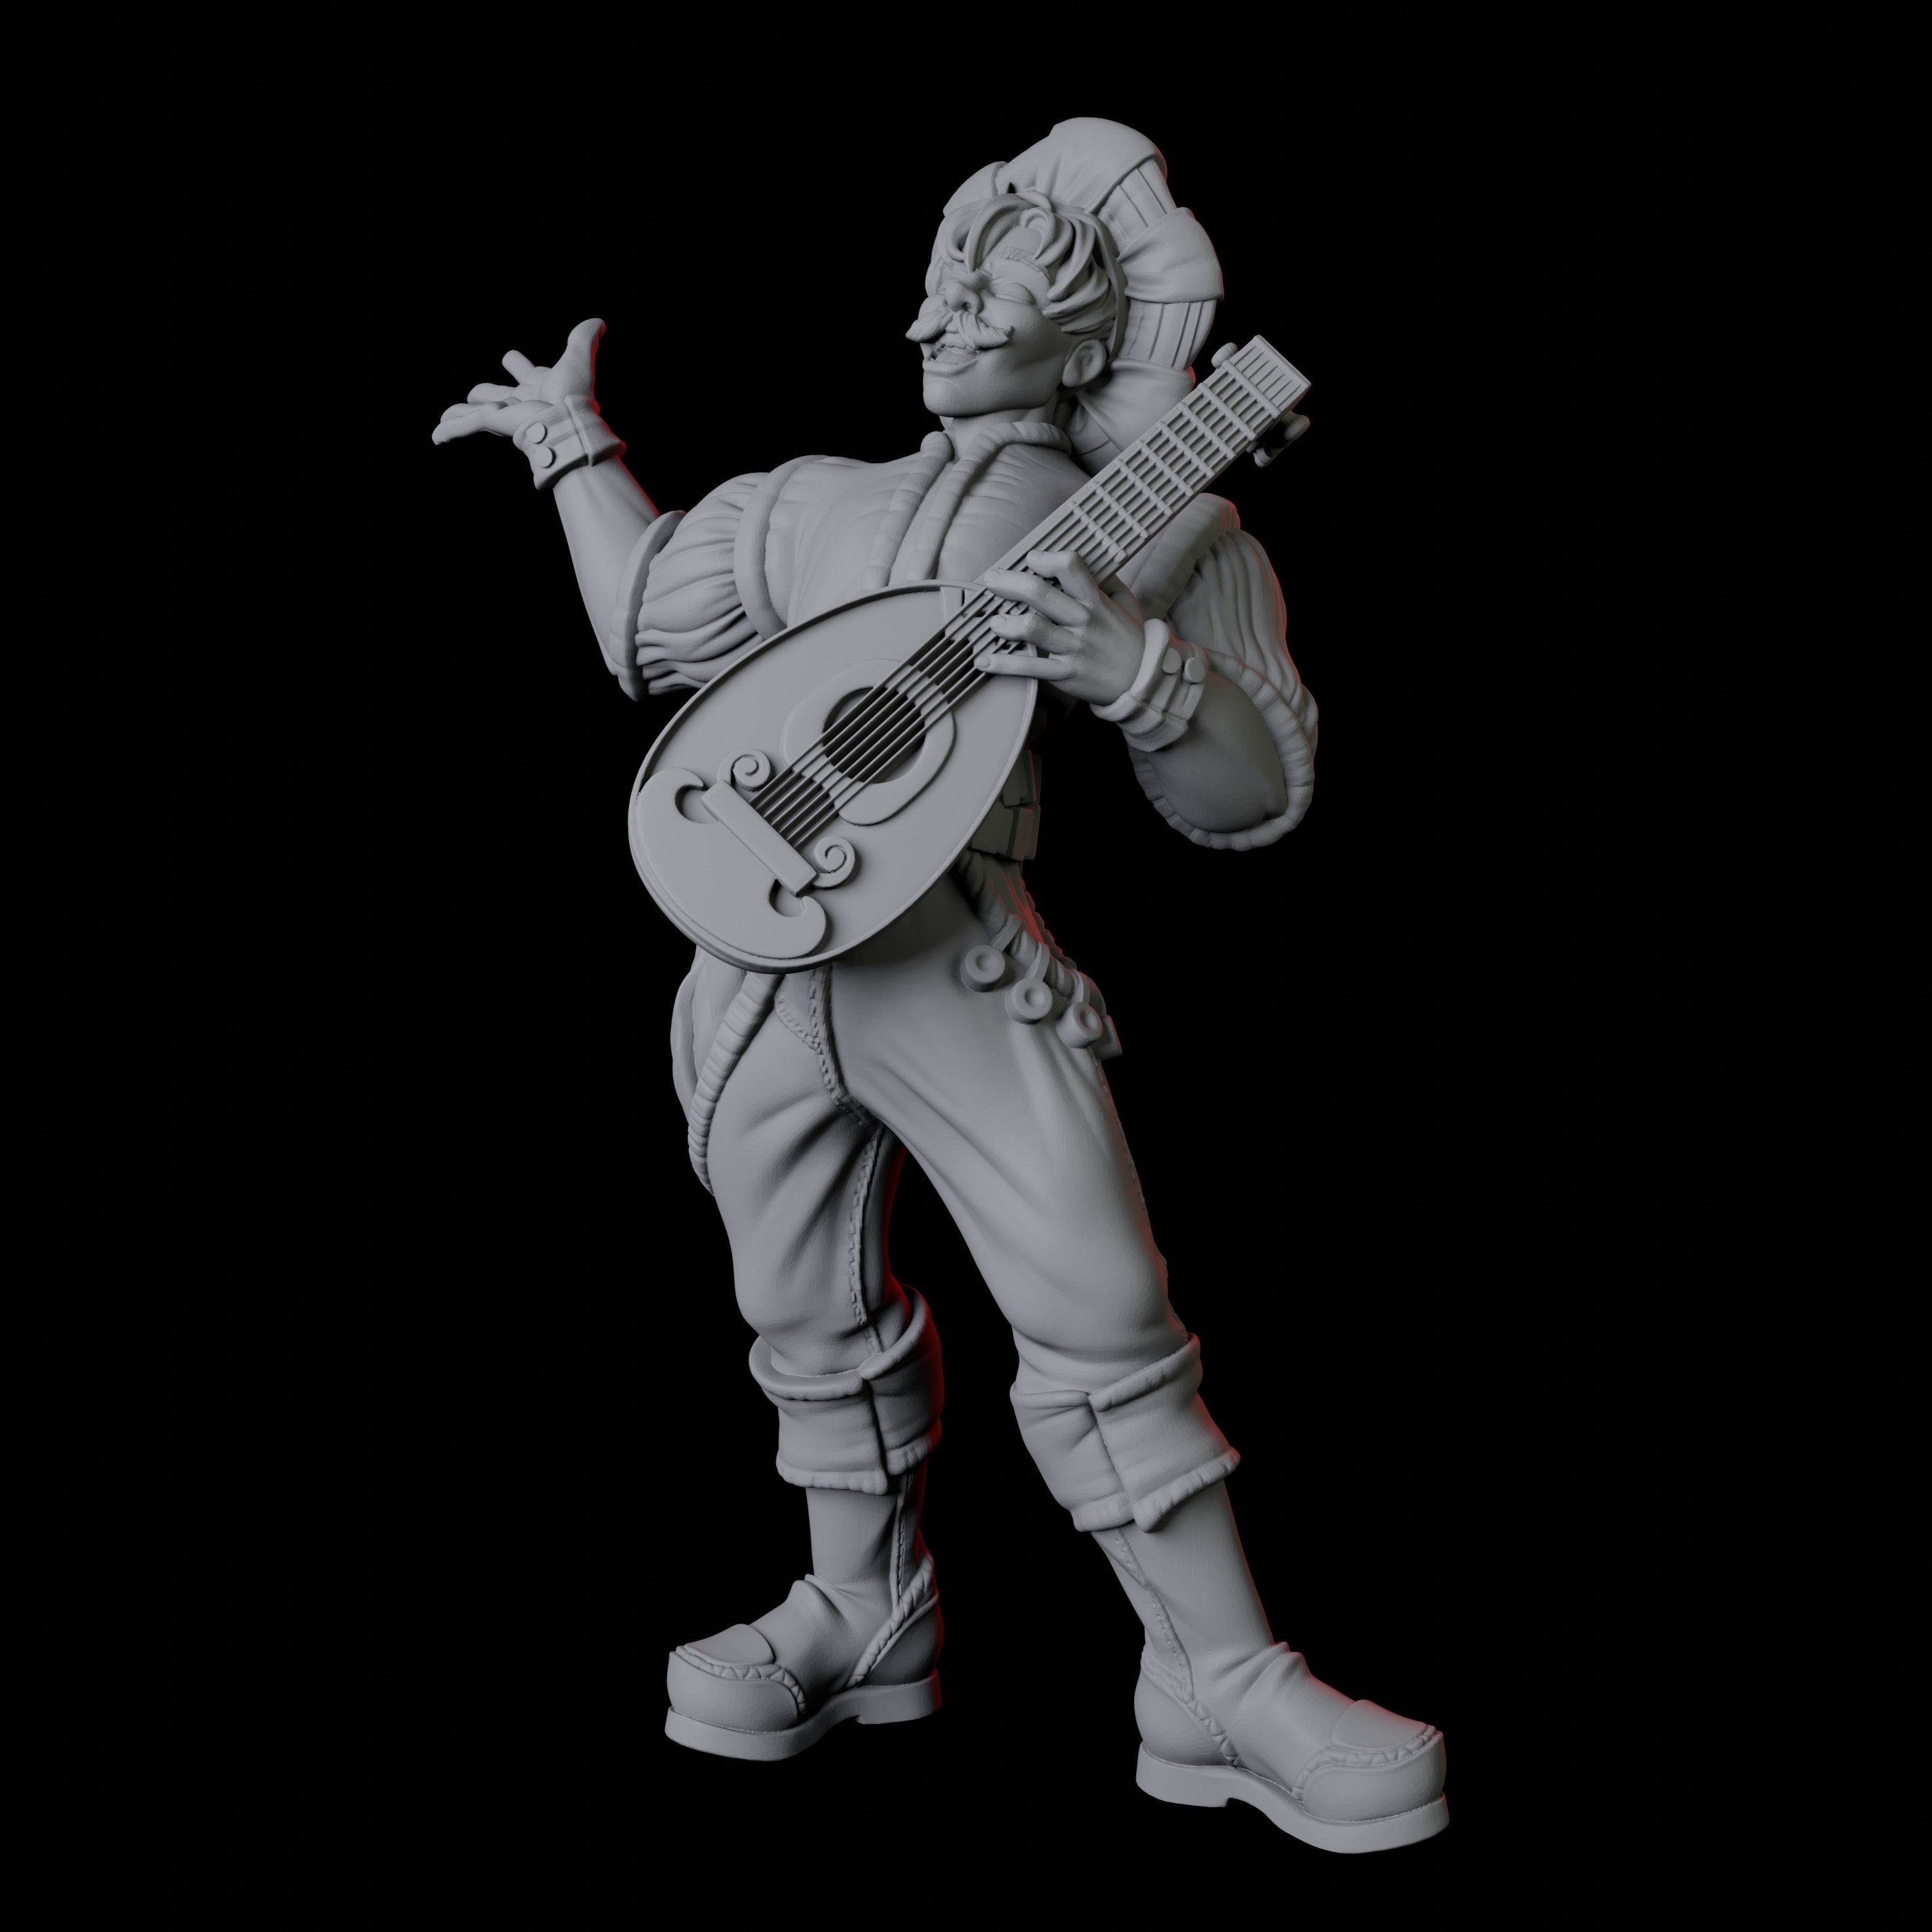 Lute Bard Miniature for Dungeons and Dragons